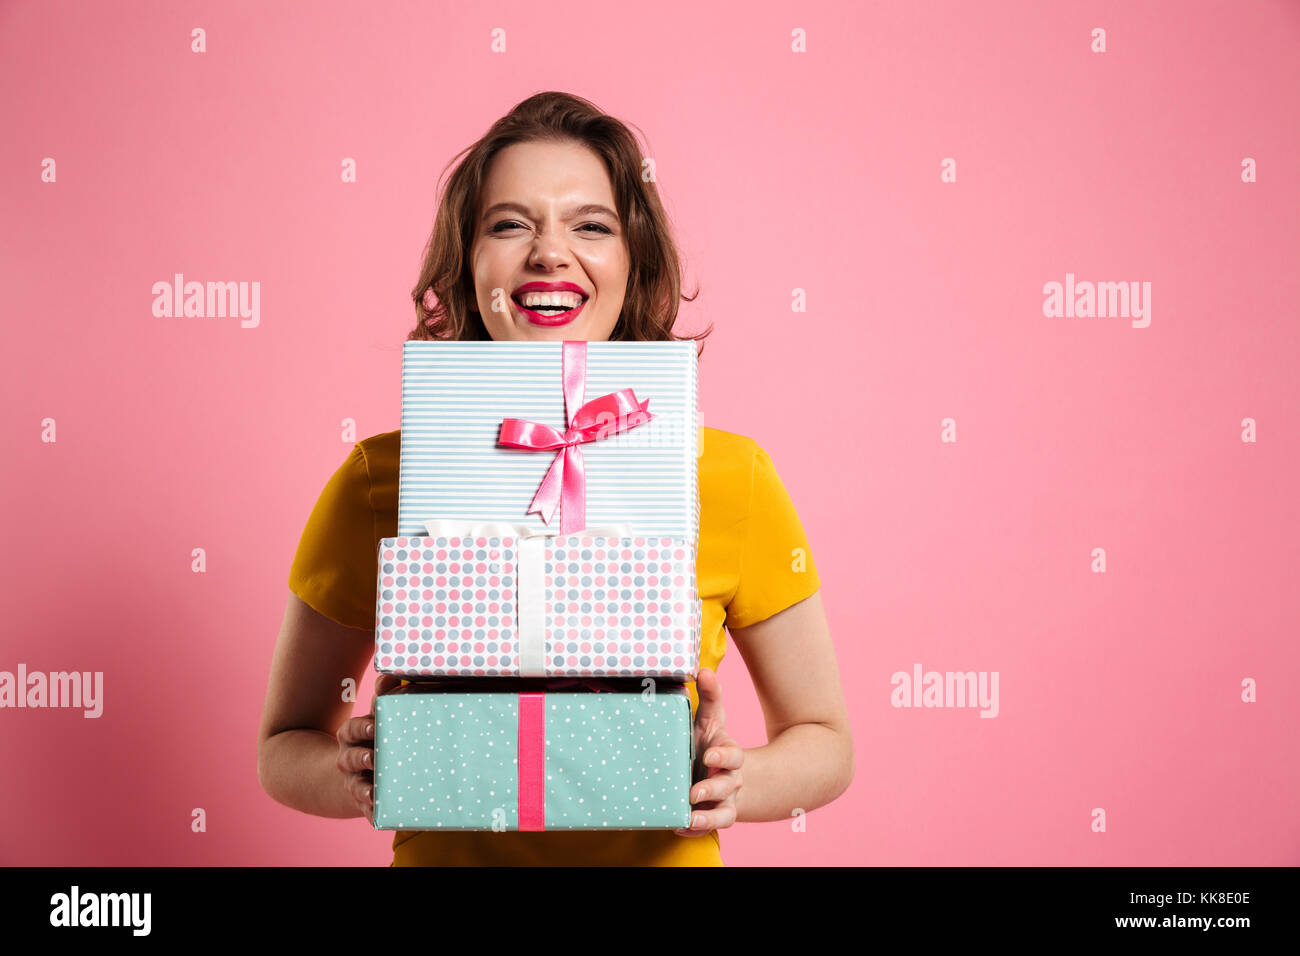 Happy laughing woman with red lips holding bunch of gift boxes, looking at camera, isolé sur fond rose Banque D'Images